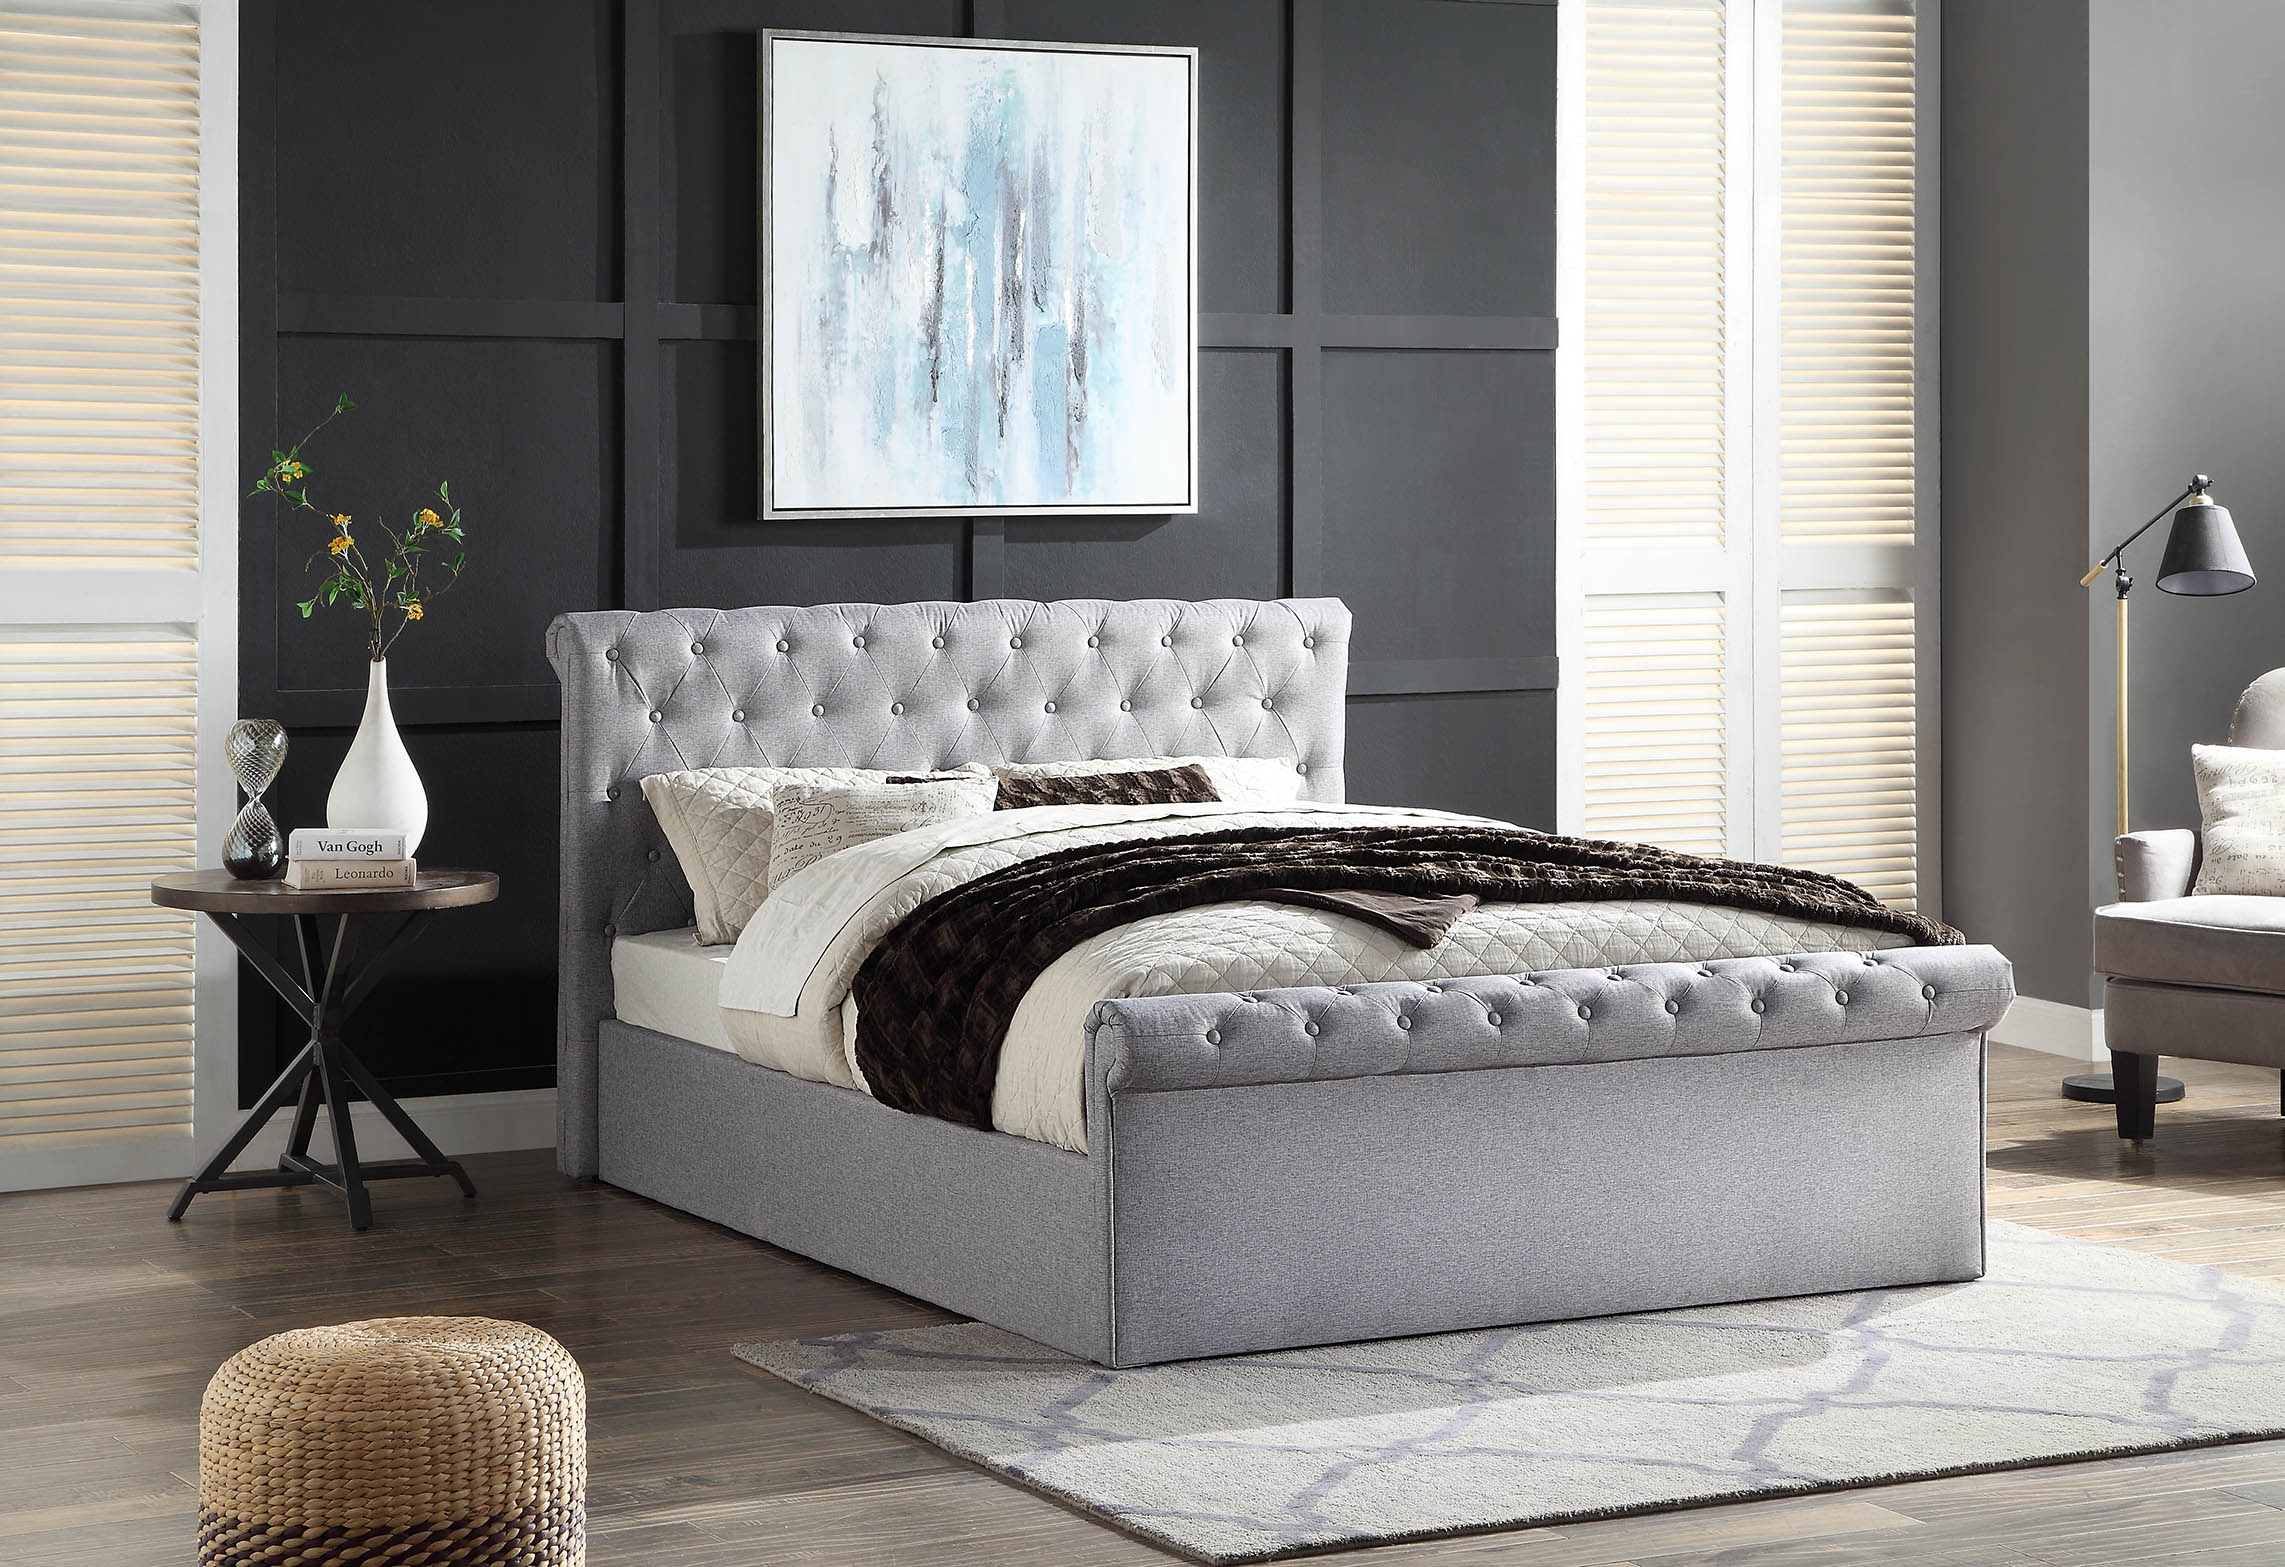 Winfield King Ottoman Bed Frame With, King Size Bed Frame Lift Up Storage